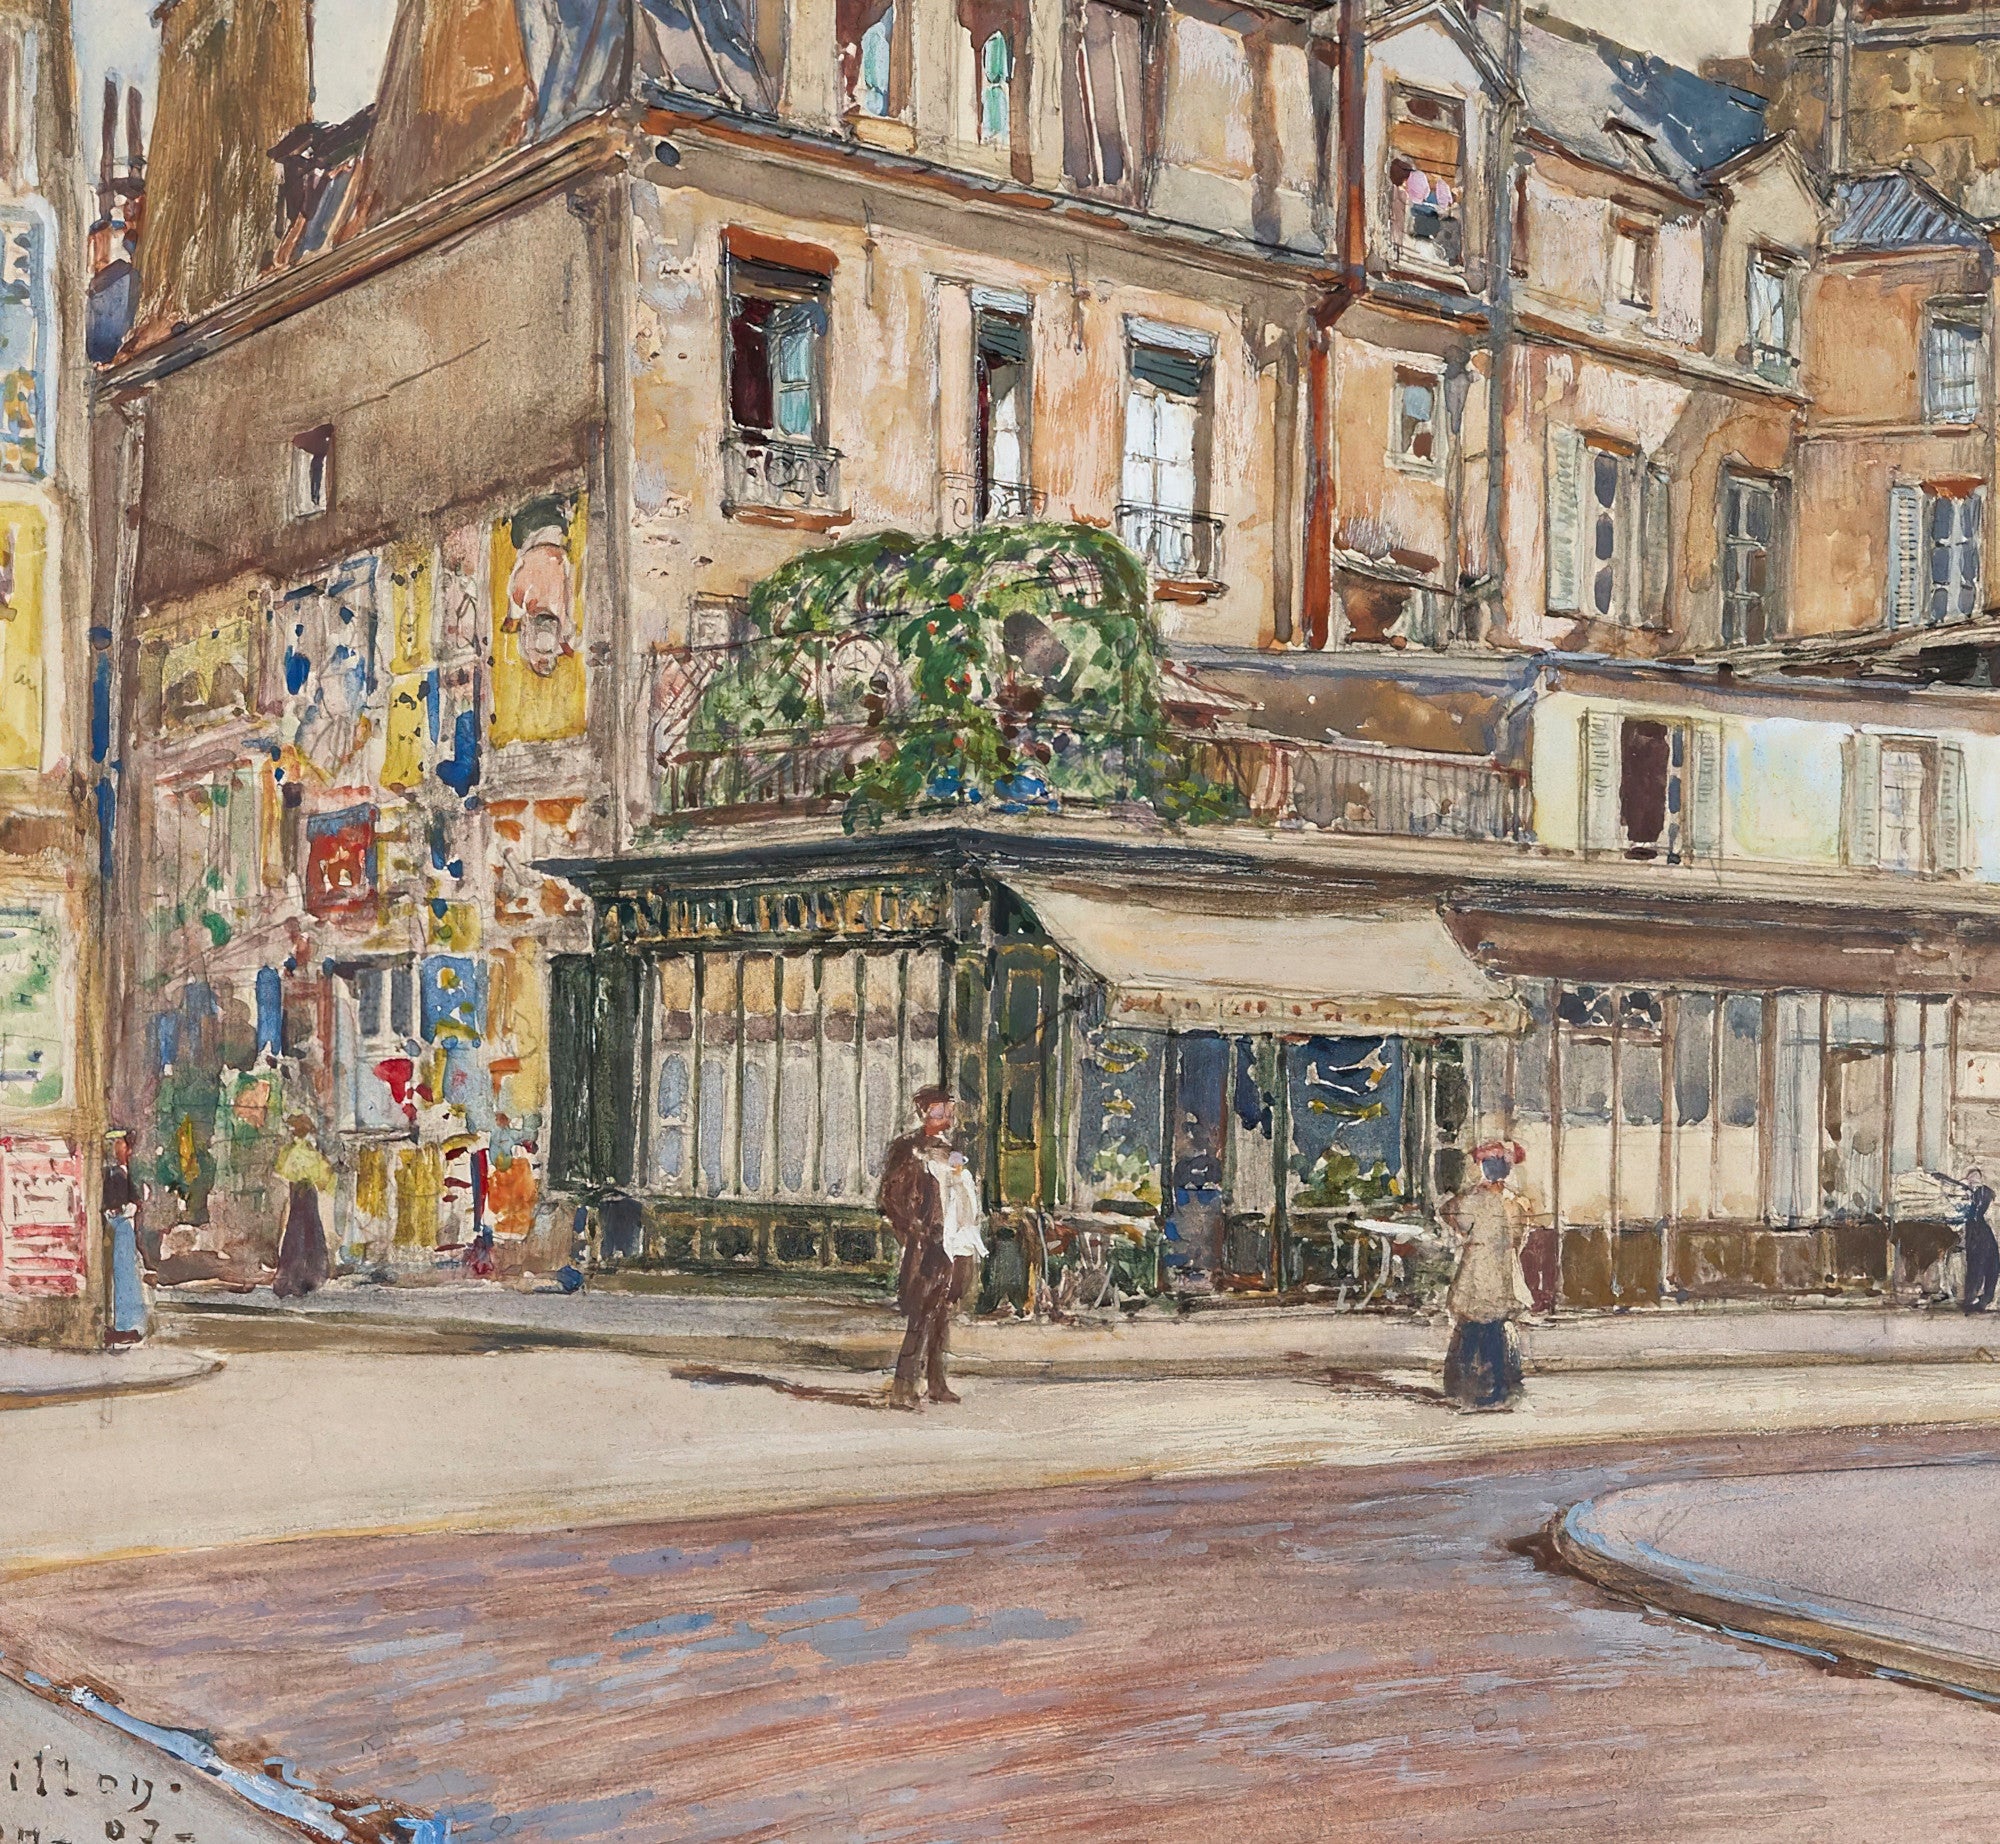 Frederic Anatole Houbron Fine Art Print, Corner rue Mabillon and rue Clément, in 1907. 5th and 6th arrondissements